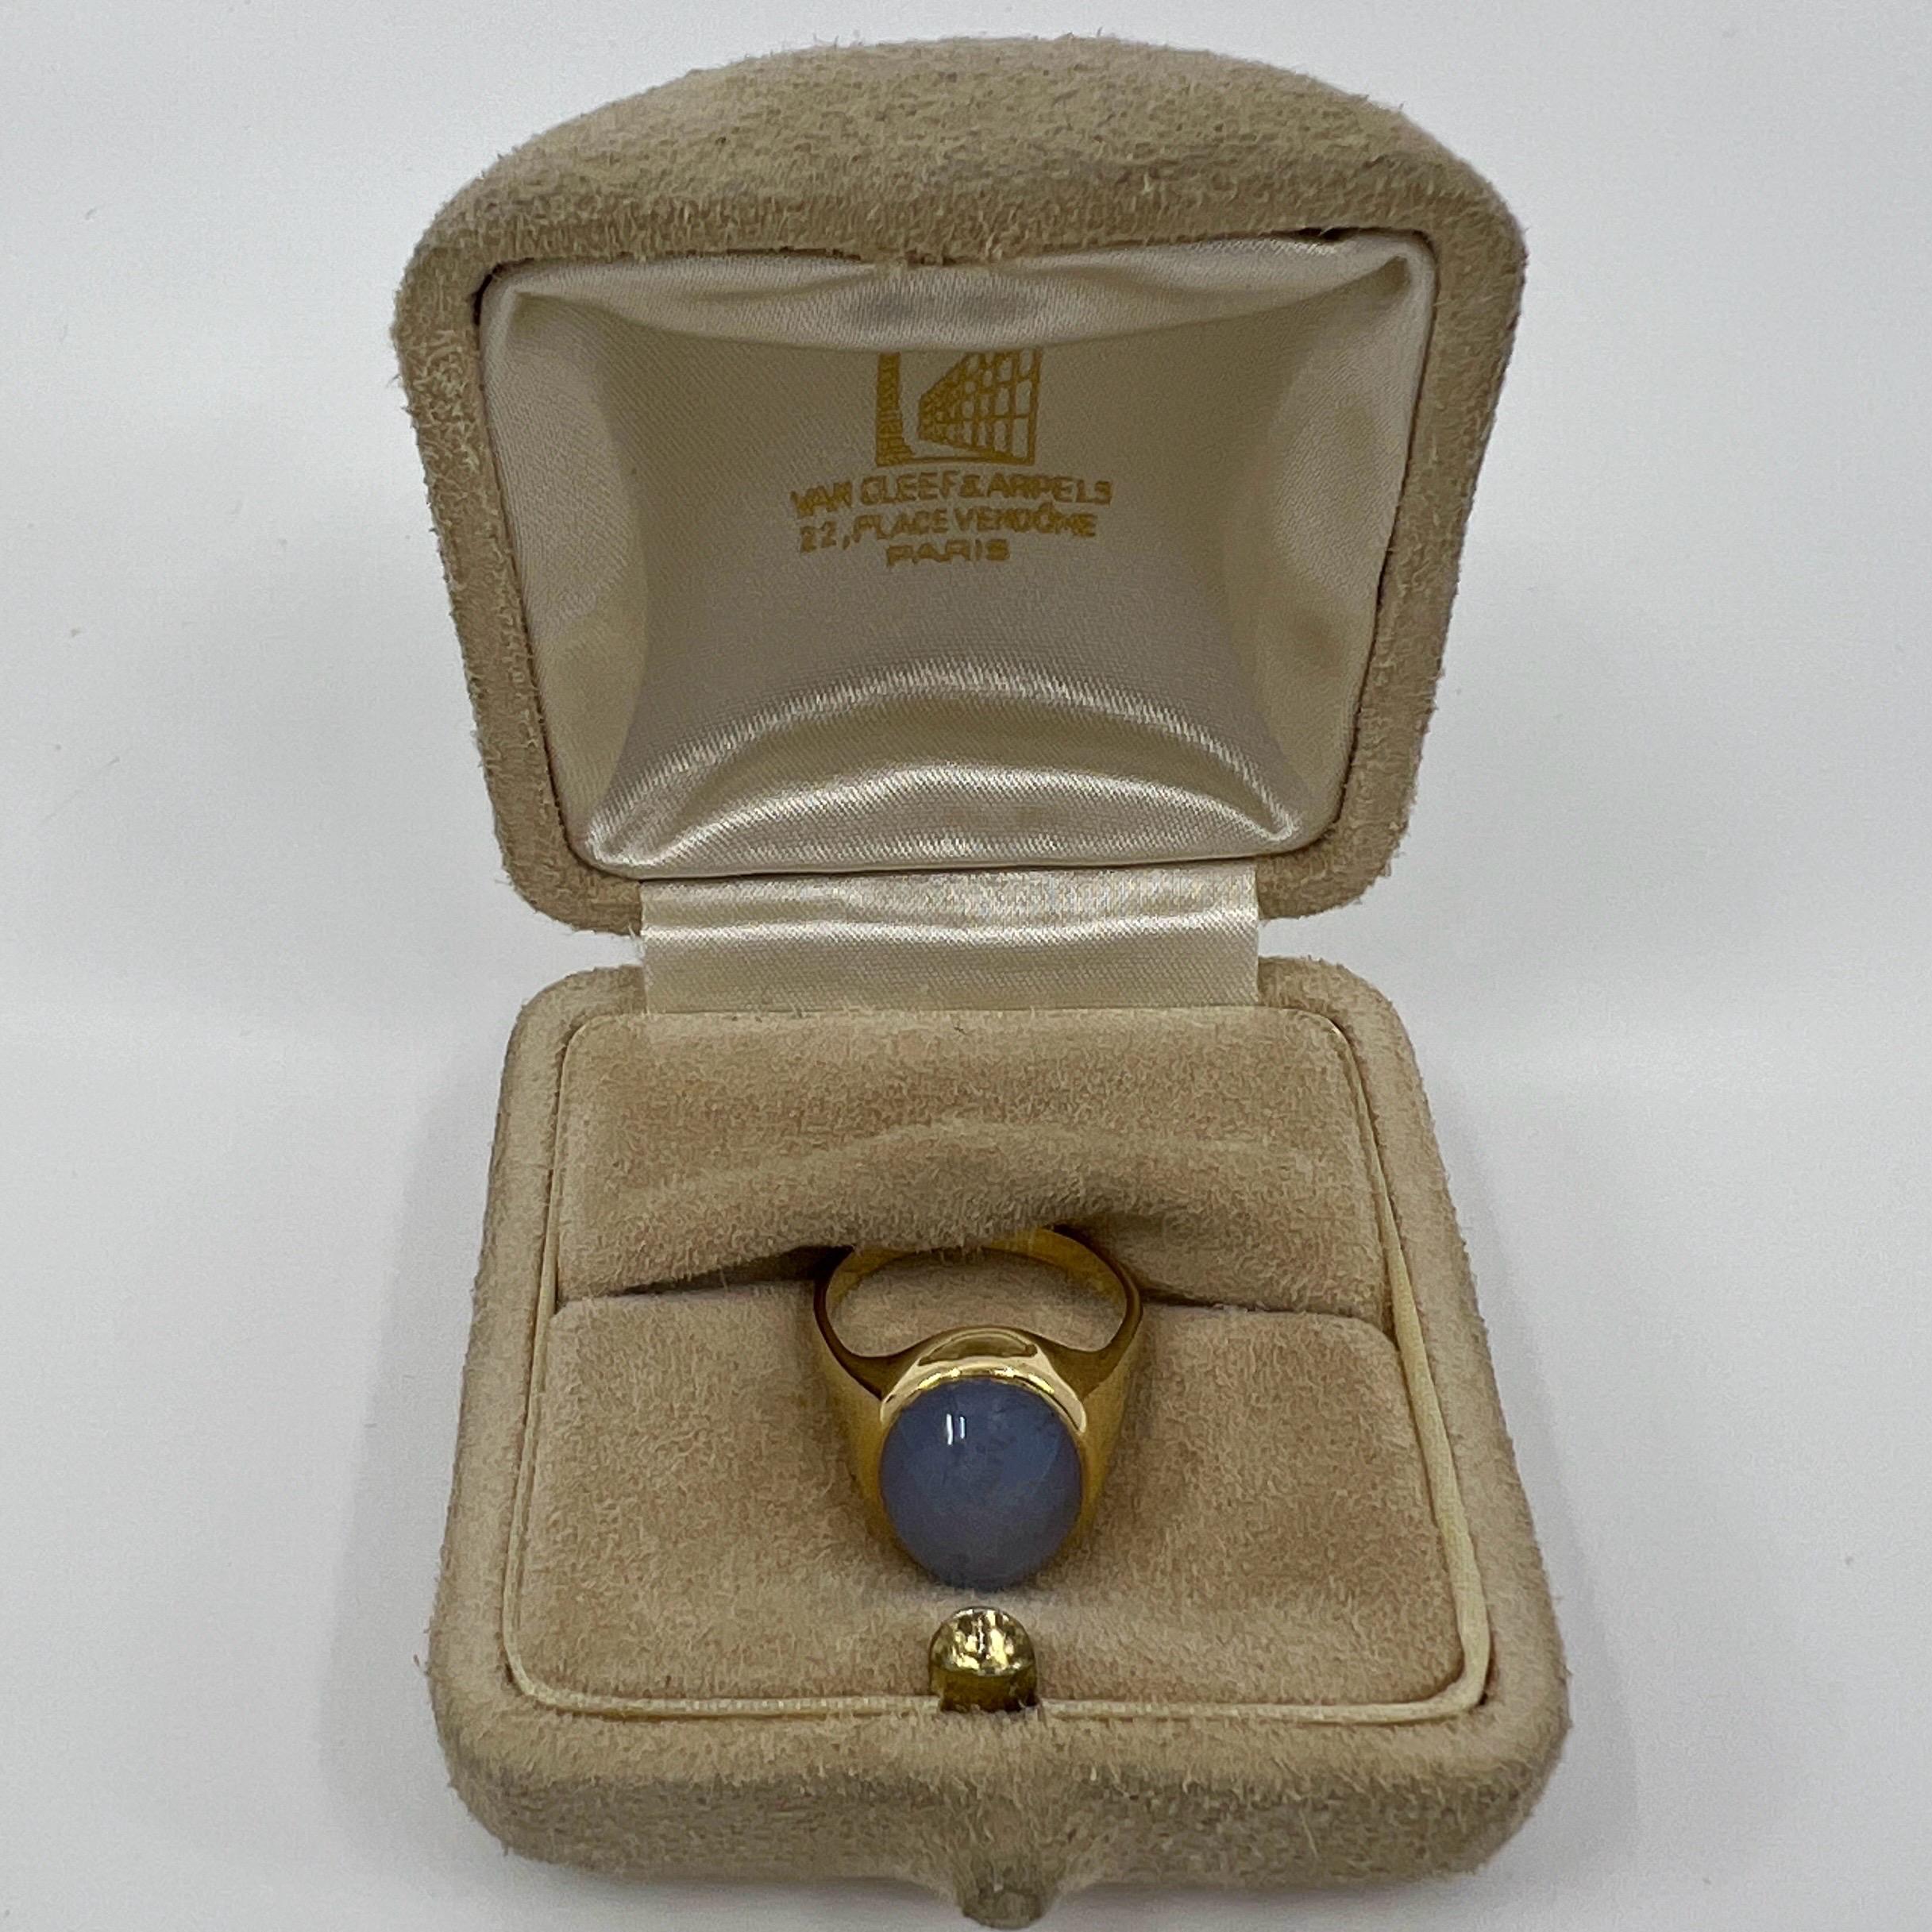 Very Rare Vintage Van Cleef & Arpels 10 Carat Blue Star Sapphire 18k Yellow Gold Oval Cabochon Dome Ring.

A stunning vintage (almost antique) ring by French fine jewellery house Van Cleef & Arpels. 
Very rare vintage VCA ring set with a large oval